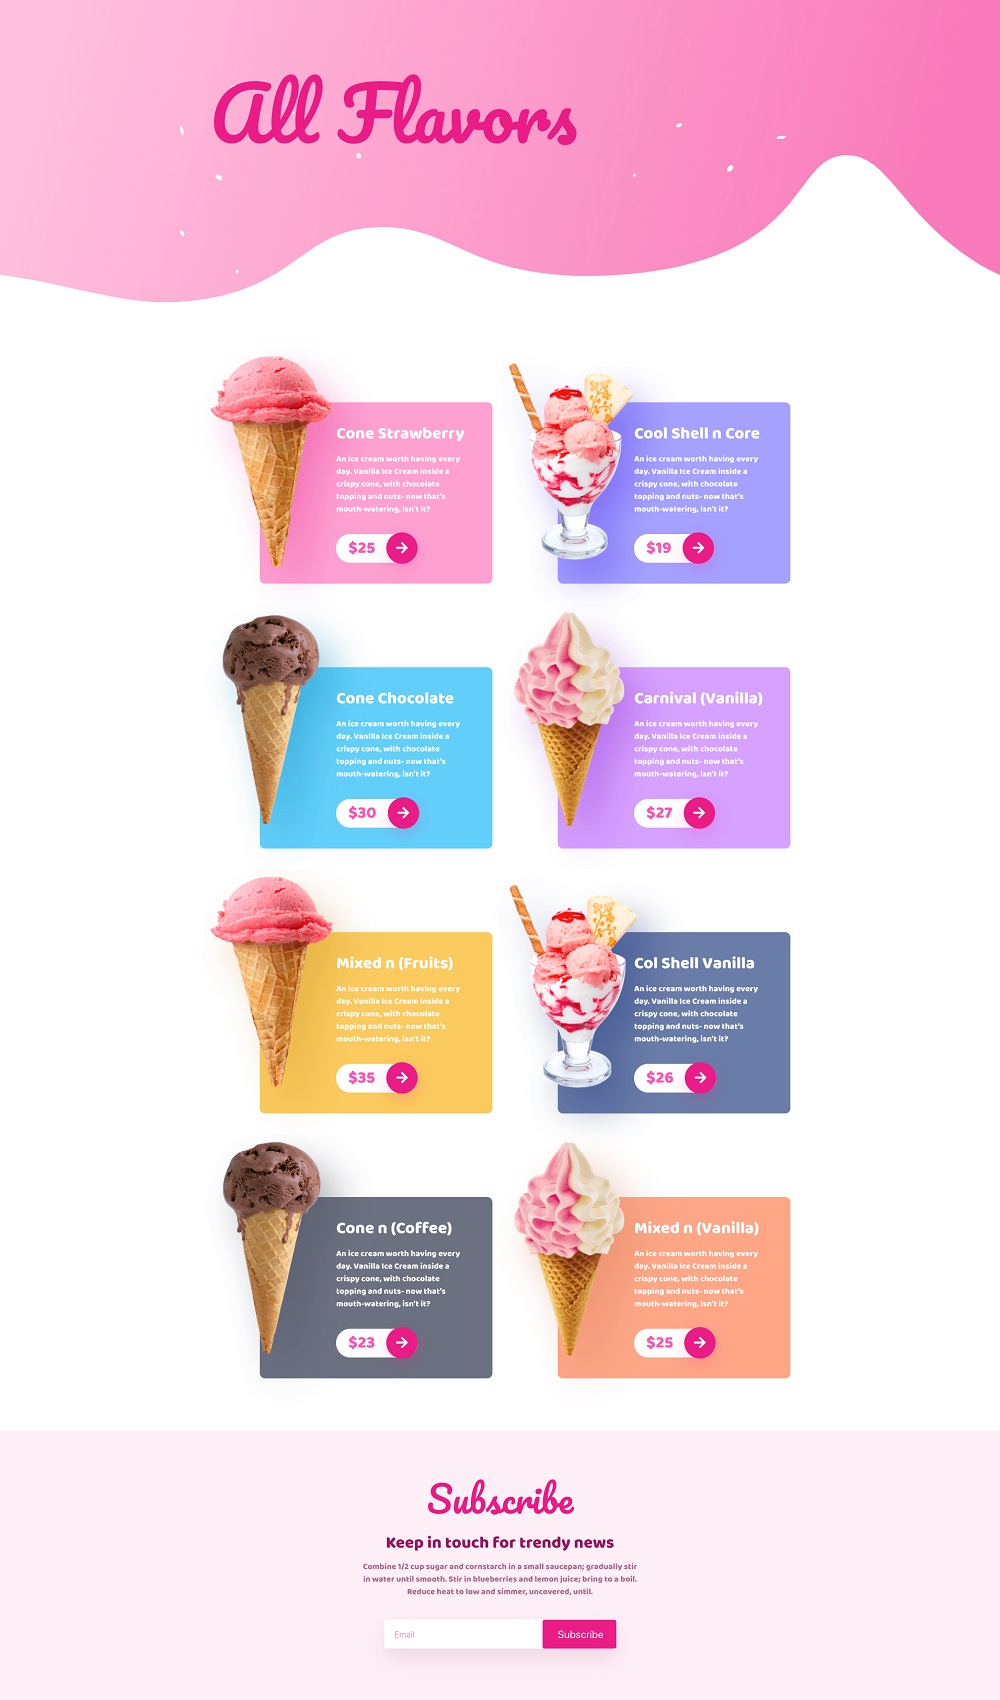 Introducing Ice Cream Parlour A Free Layout Bundle For Sp Page Builder Pro Joomshaper